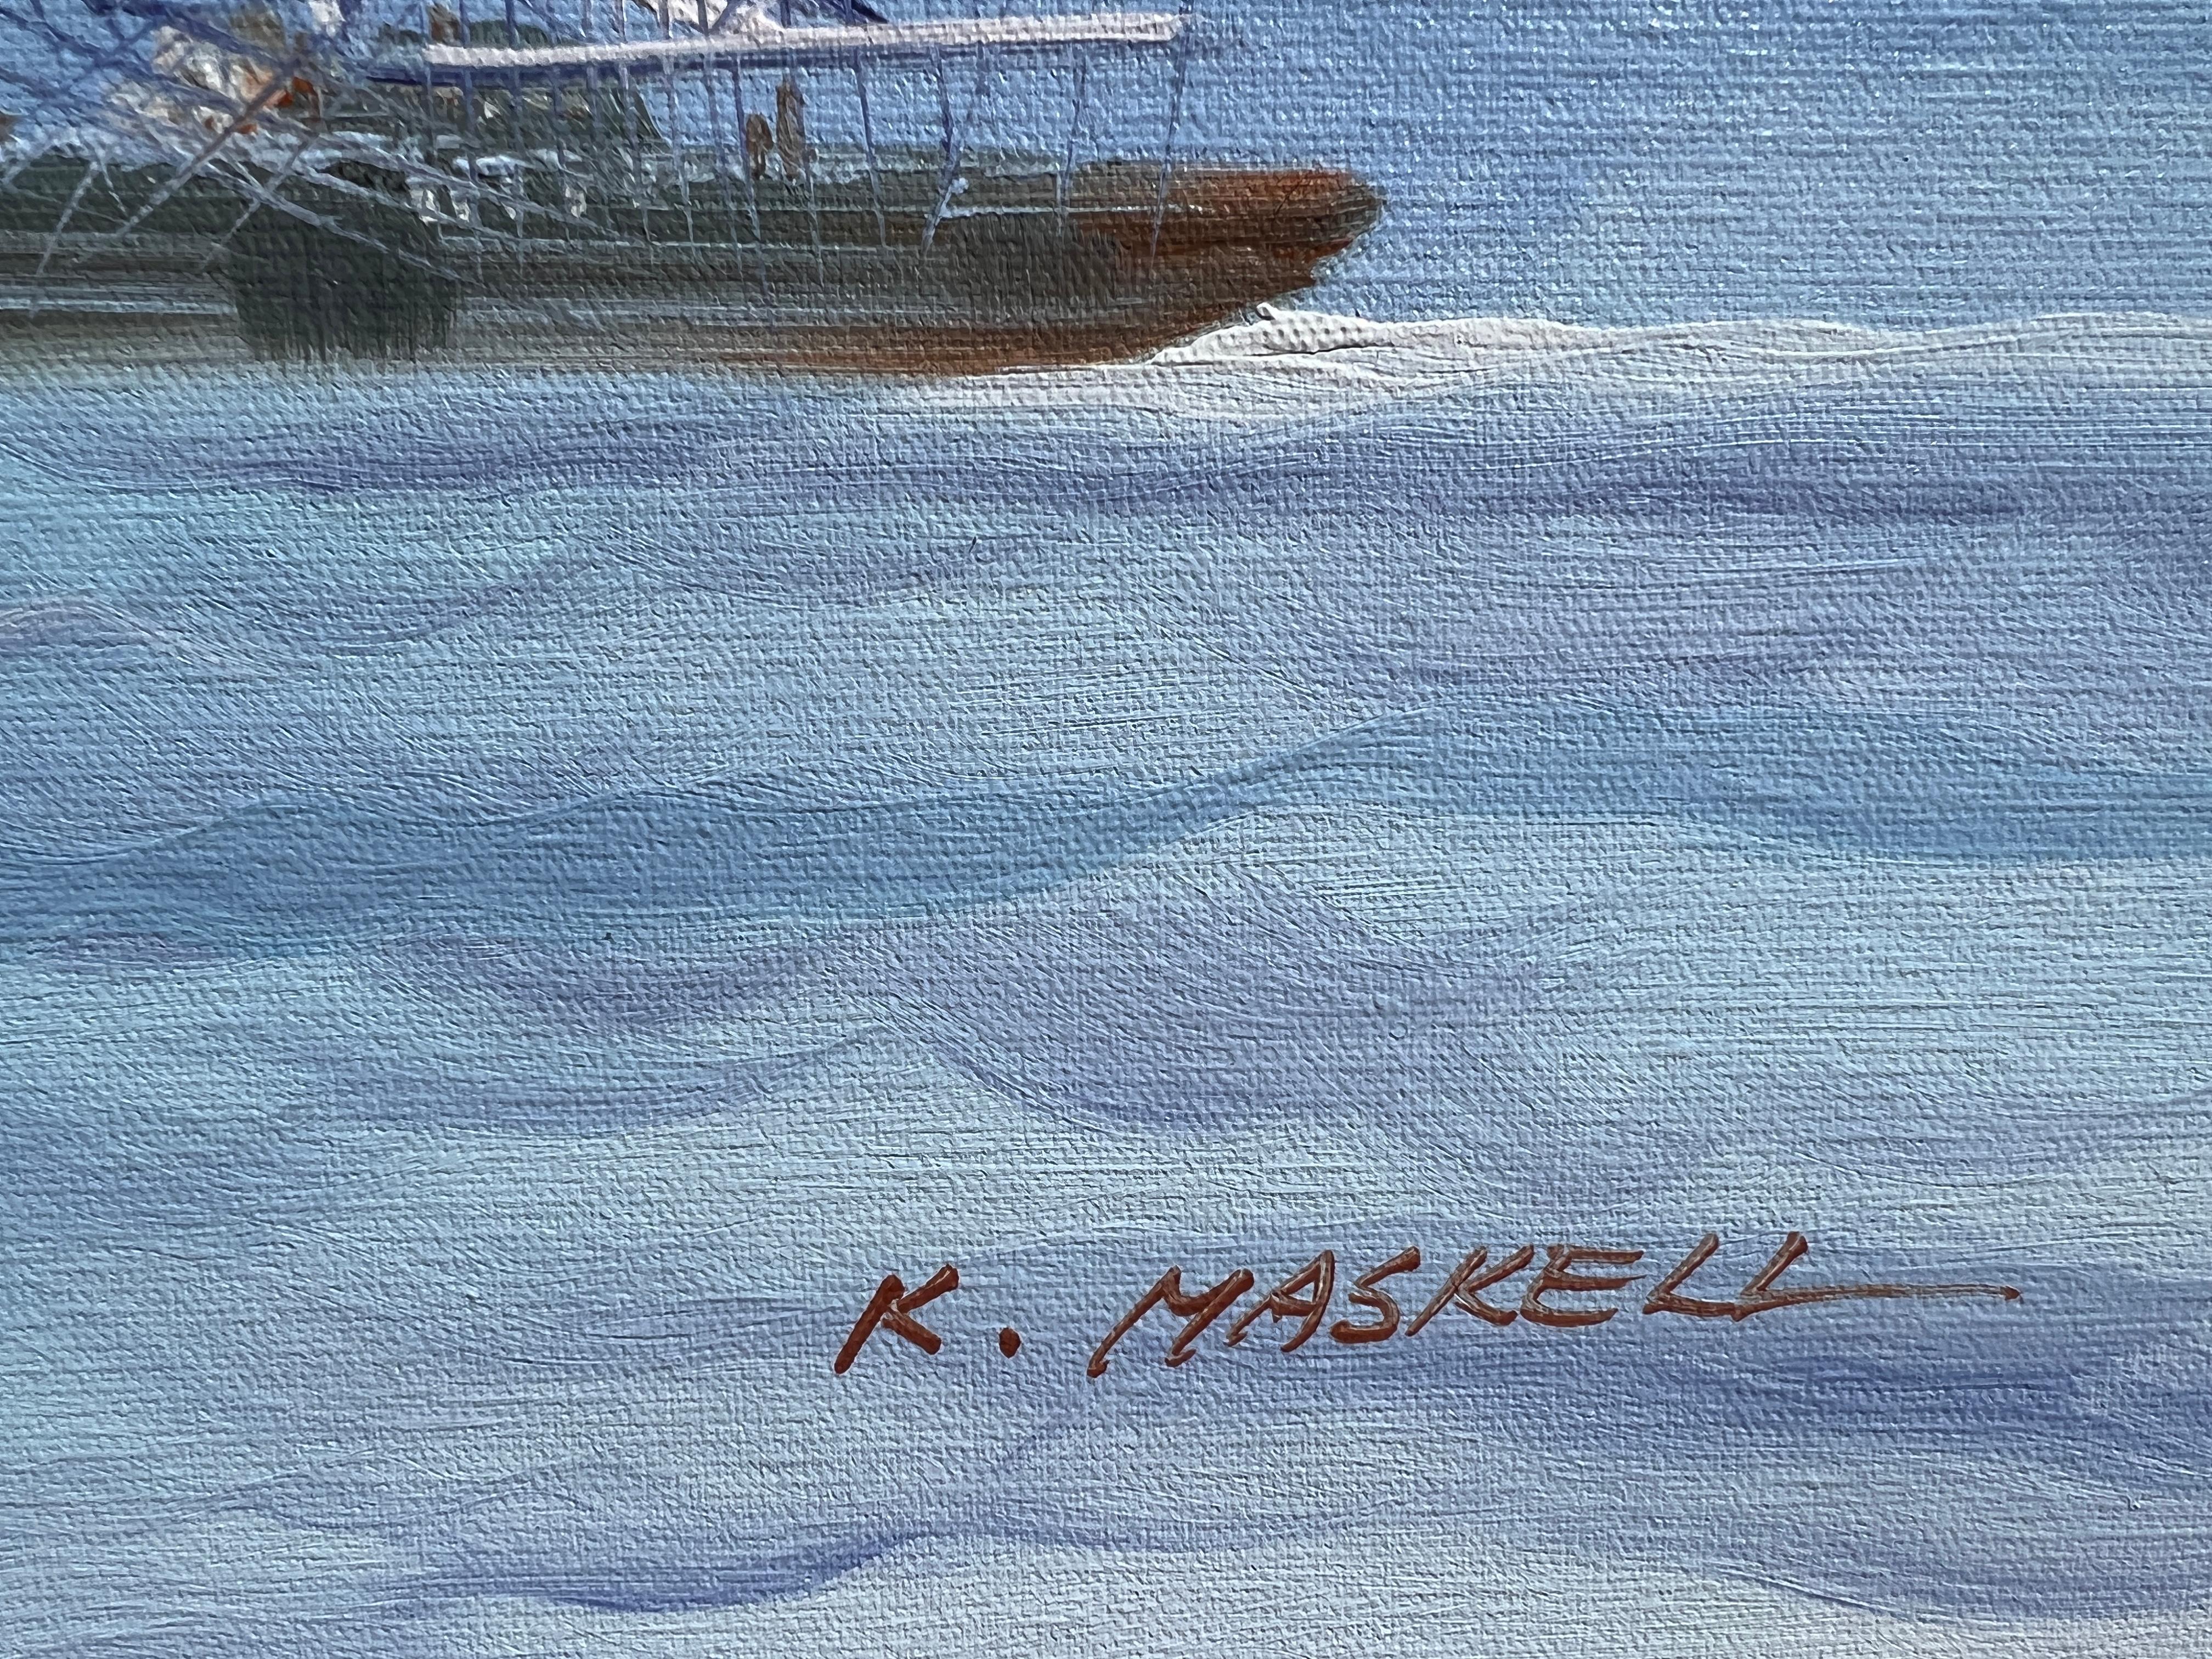 K.MASKELL Sailing Ship Original oil on Canvas Nautical Painting, Framed For Sale 2